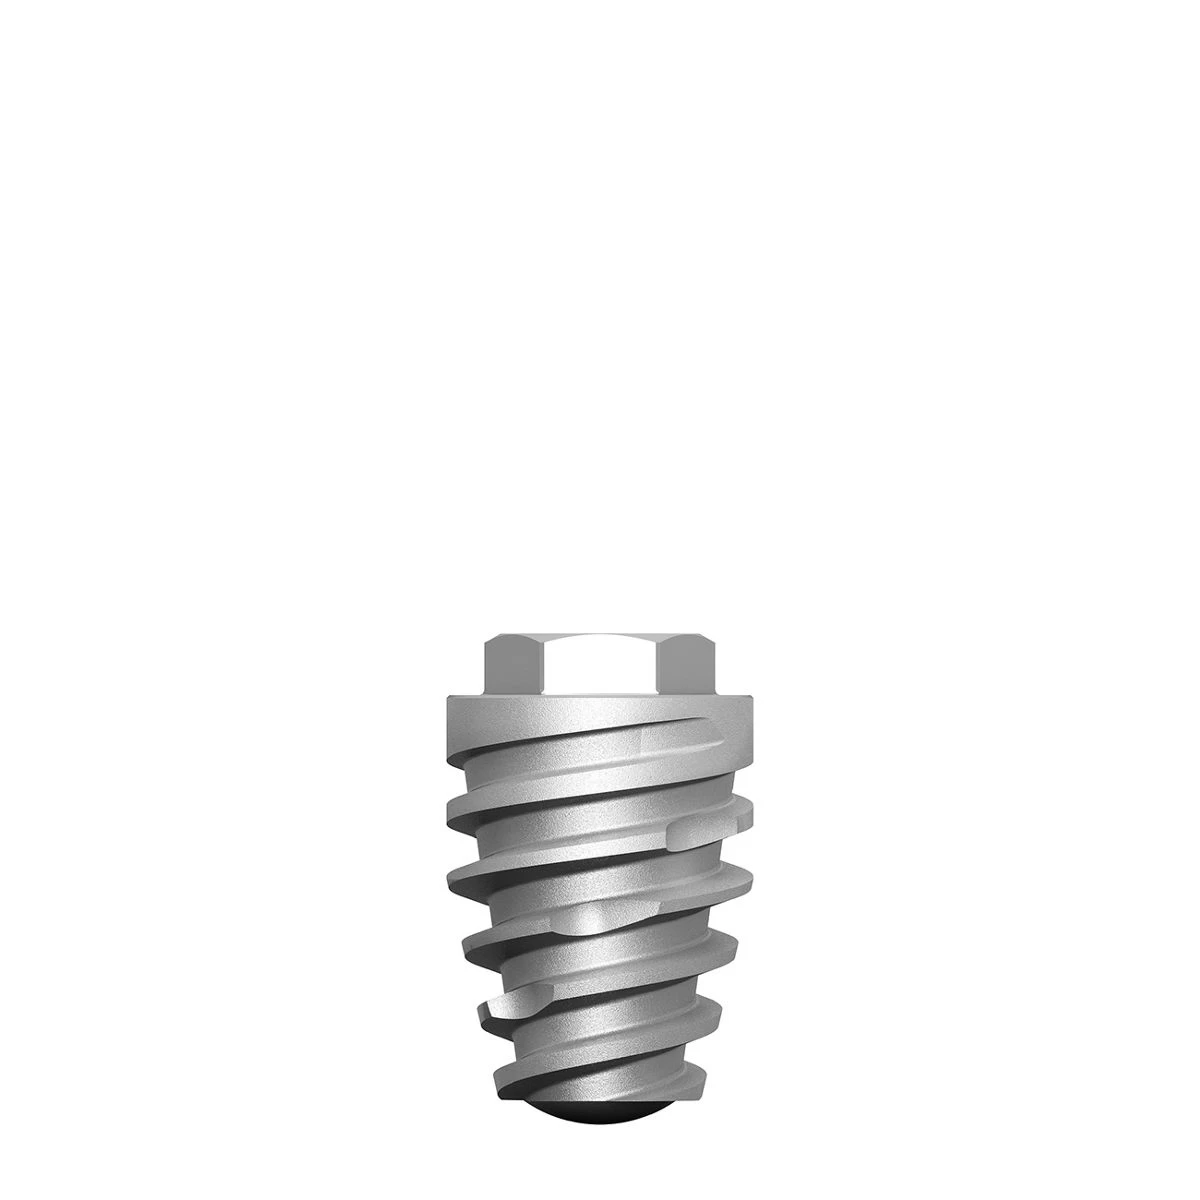 dental implant - Neodent - Drive HE Smart 3.3(3.5) - Root Form Implants ...